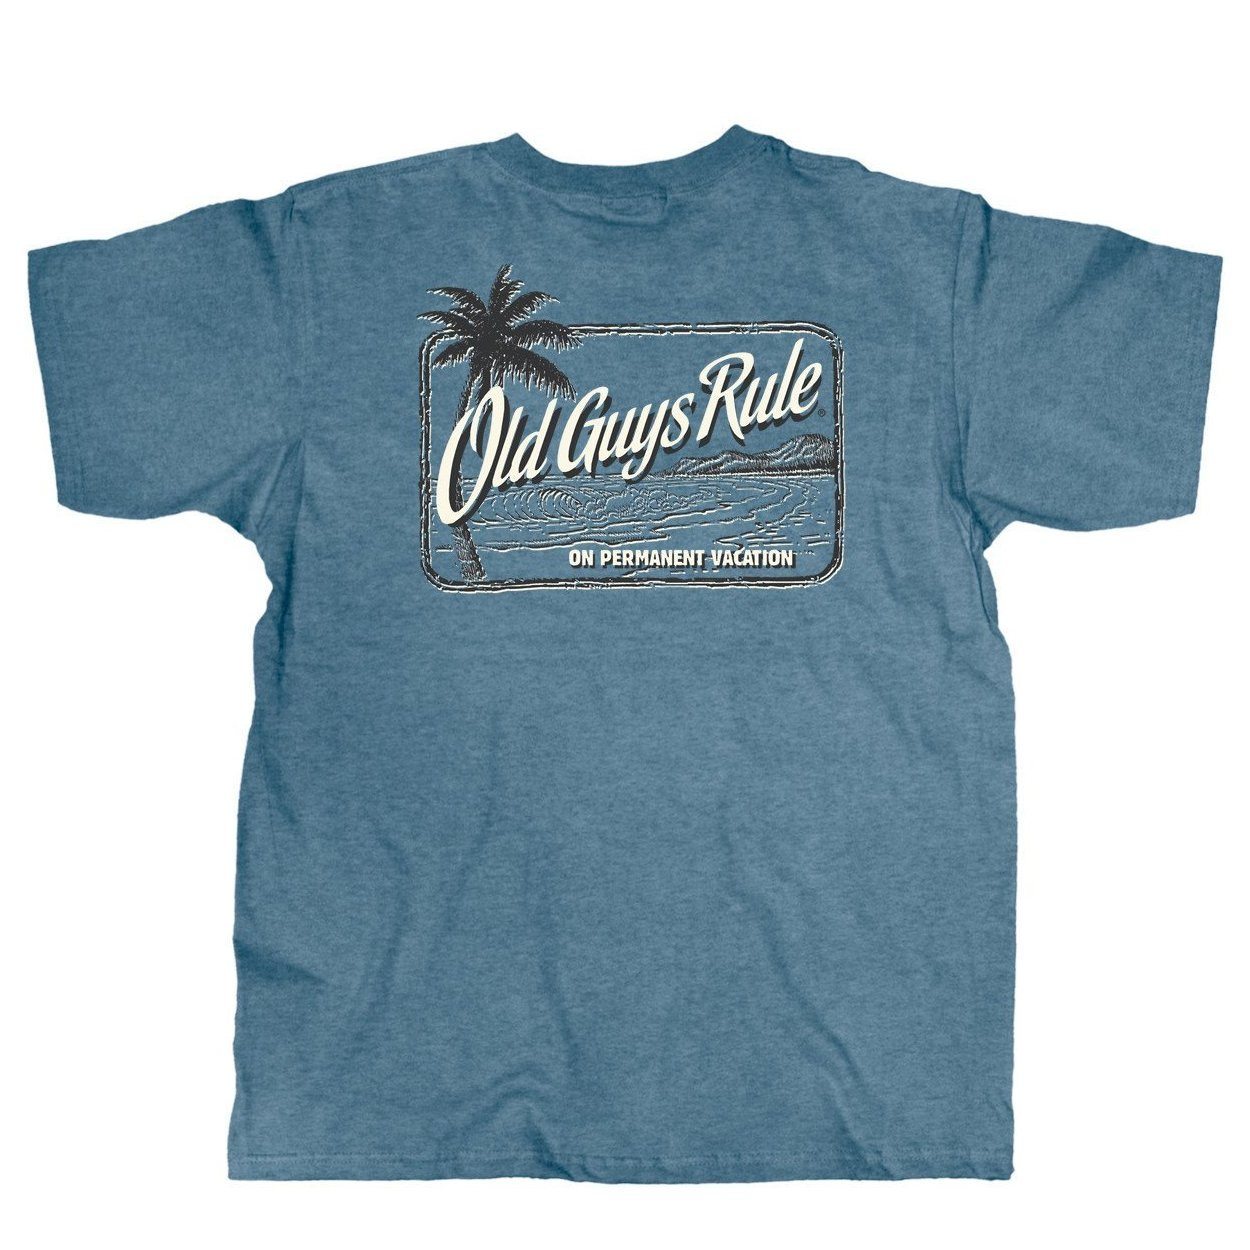 Old Guys Rule - On Permanent Vacation - Heather Indigo T-Shirt - Main View